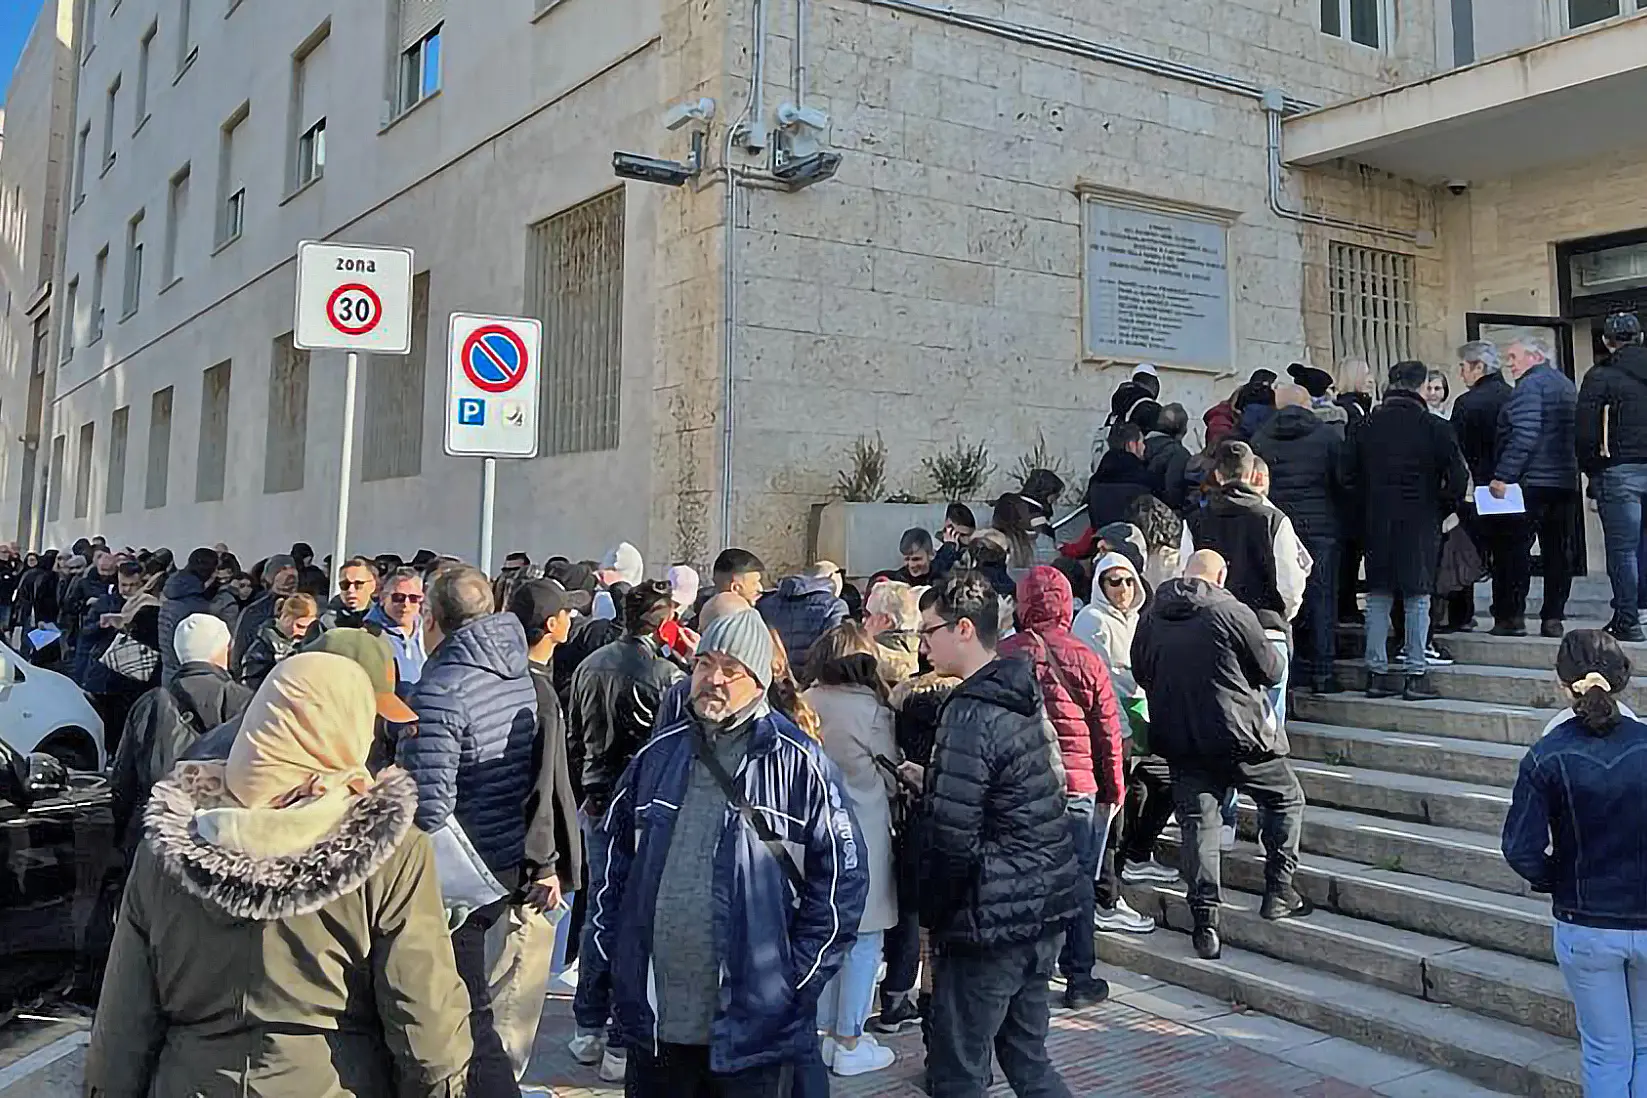 One of the last open days at the police station in Cagliari (Photo Anedda Endrich)